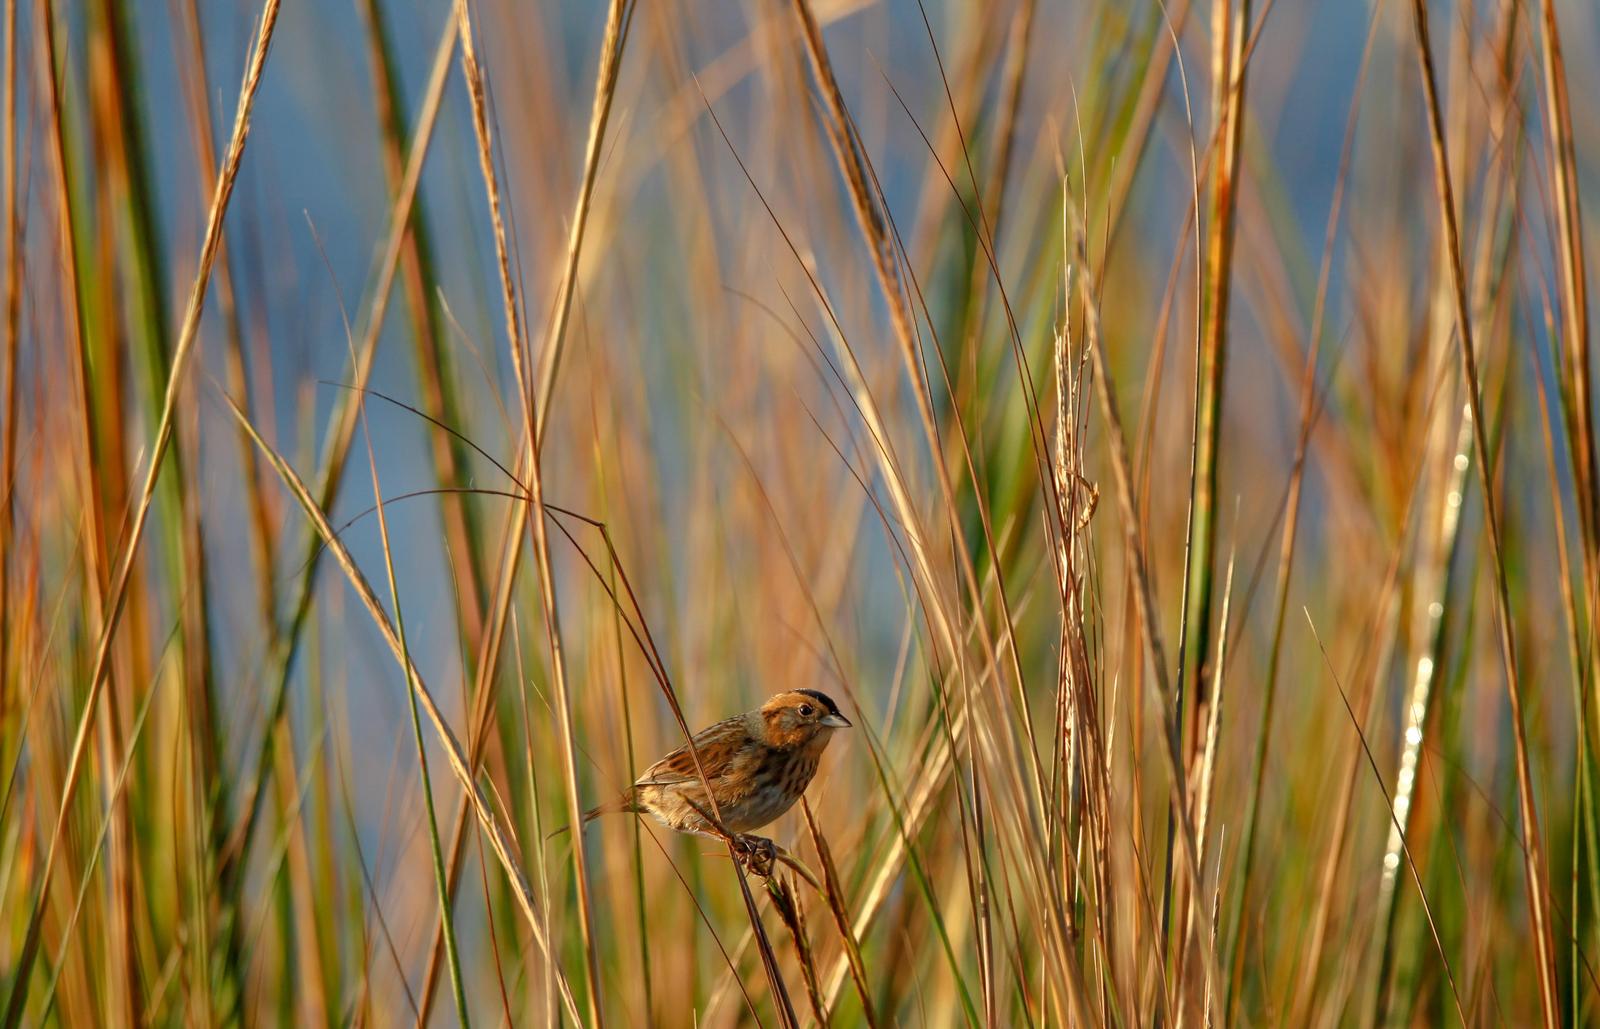 Nelson's Sparrow Photo by Lucy Wightman